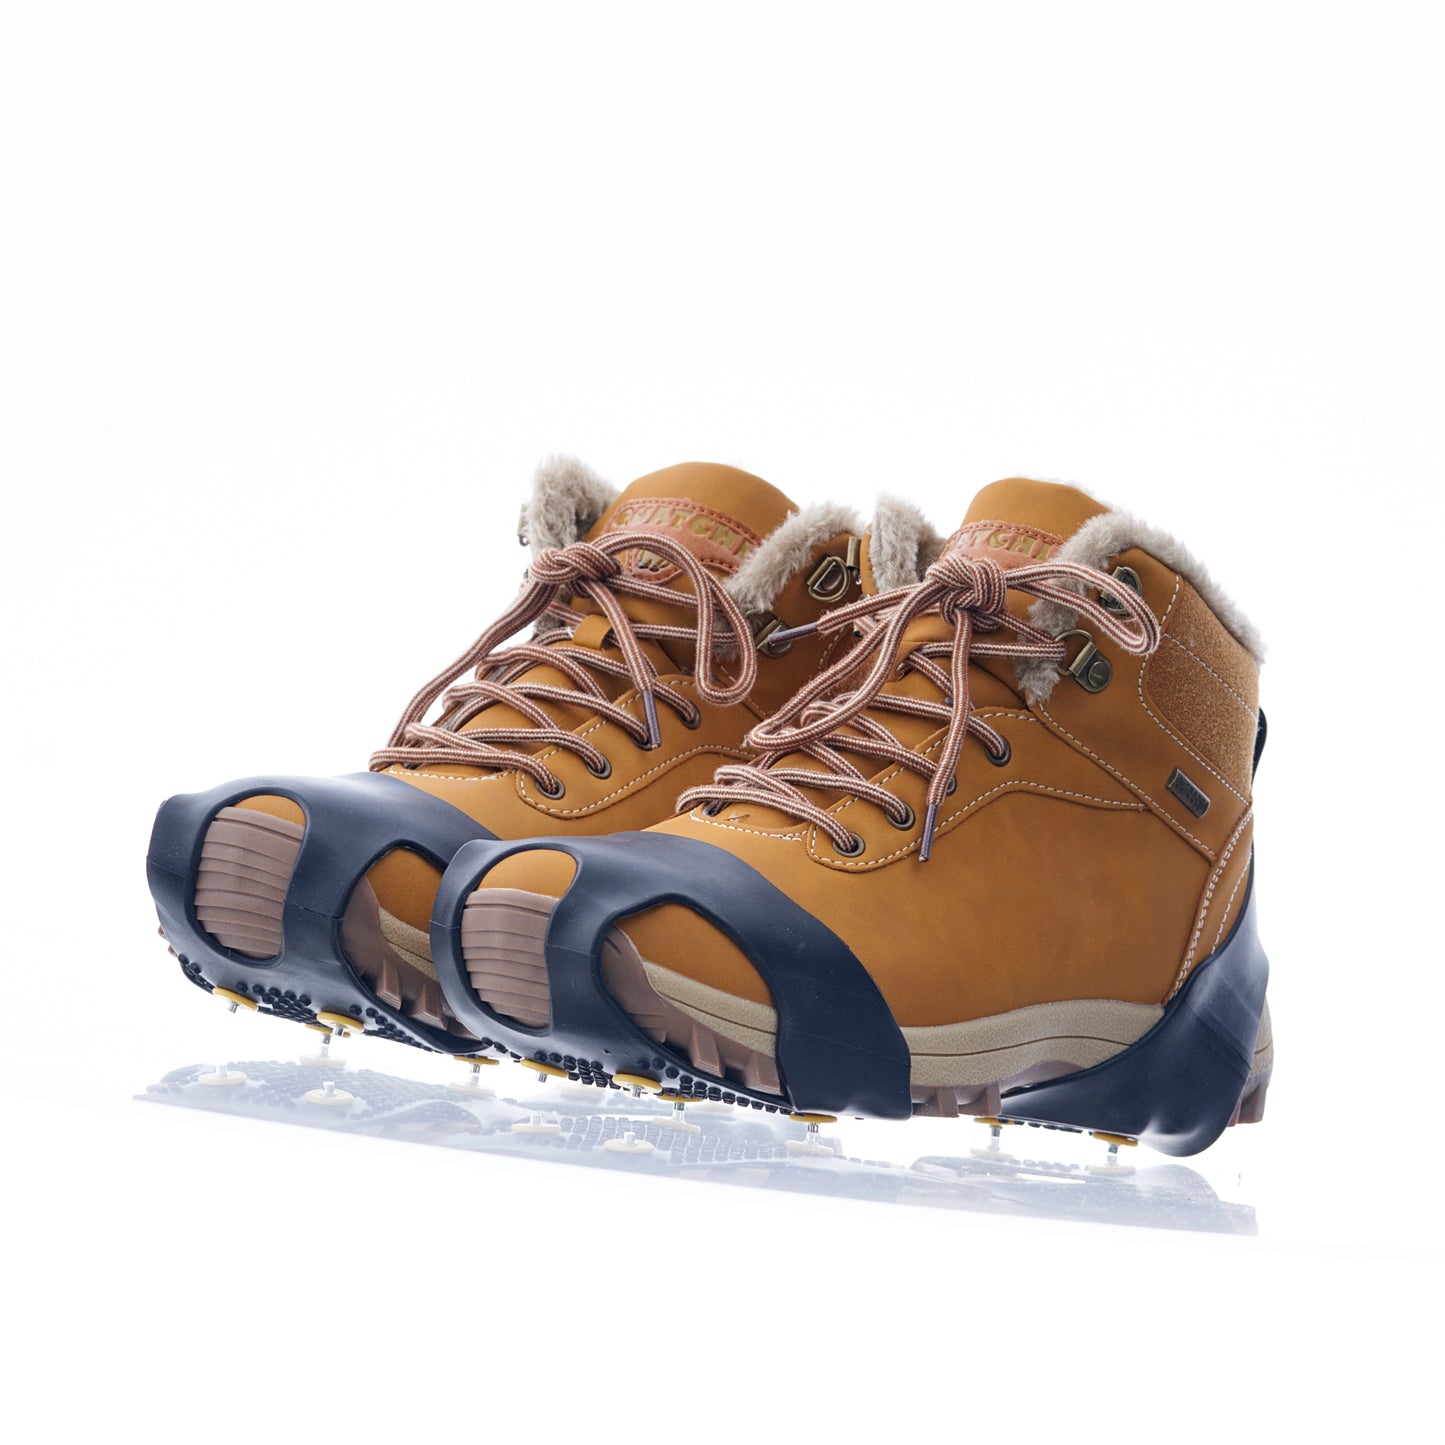 Anti Slip Cleats, Traction Cleats for Walking on Snow and Ice